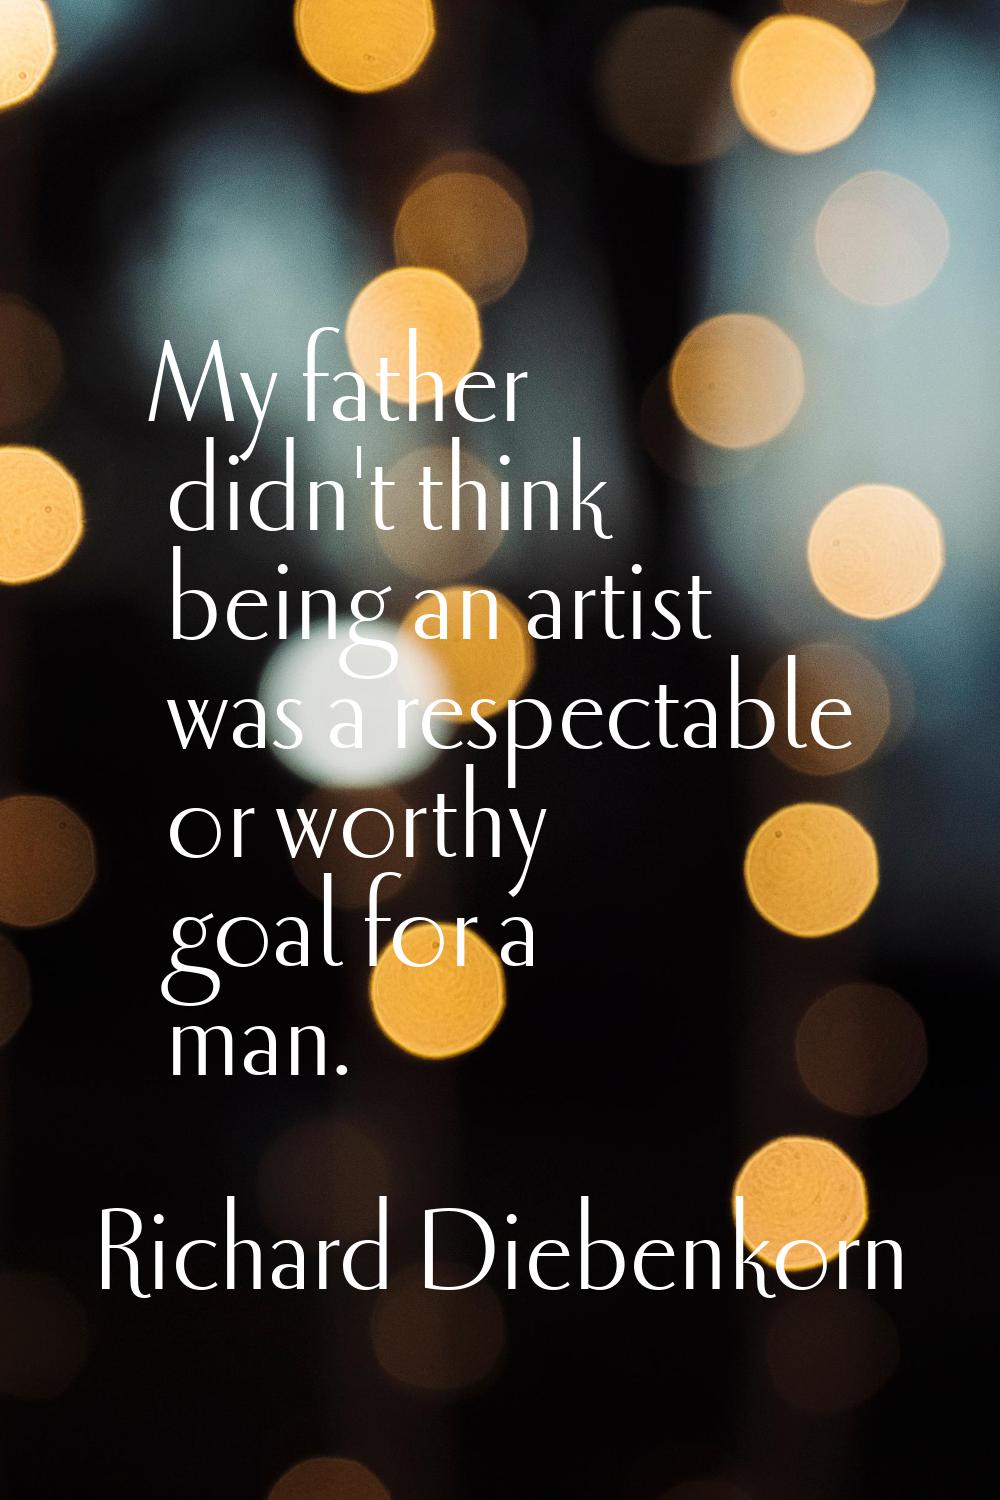 My father didn't think being an artist was a respectable or worthy goal for a man.